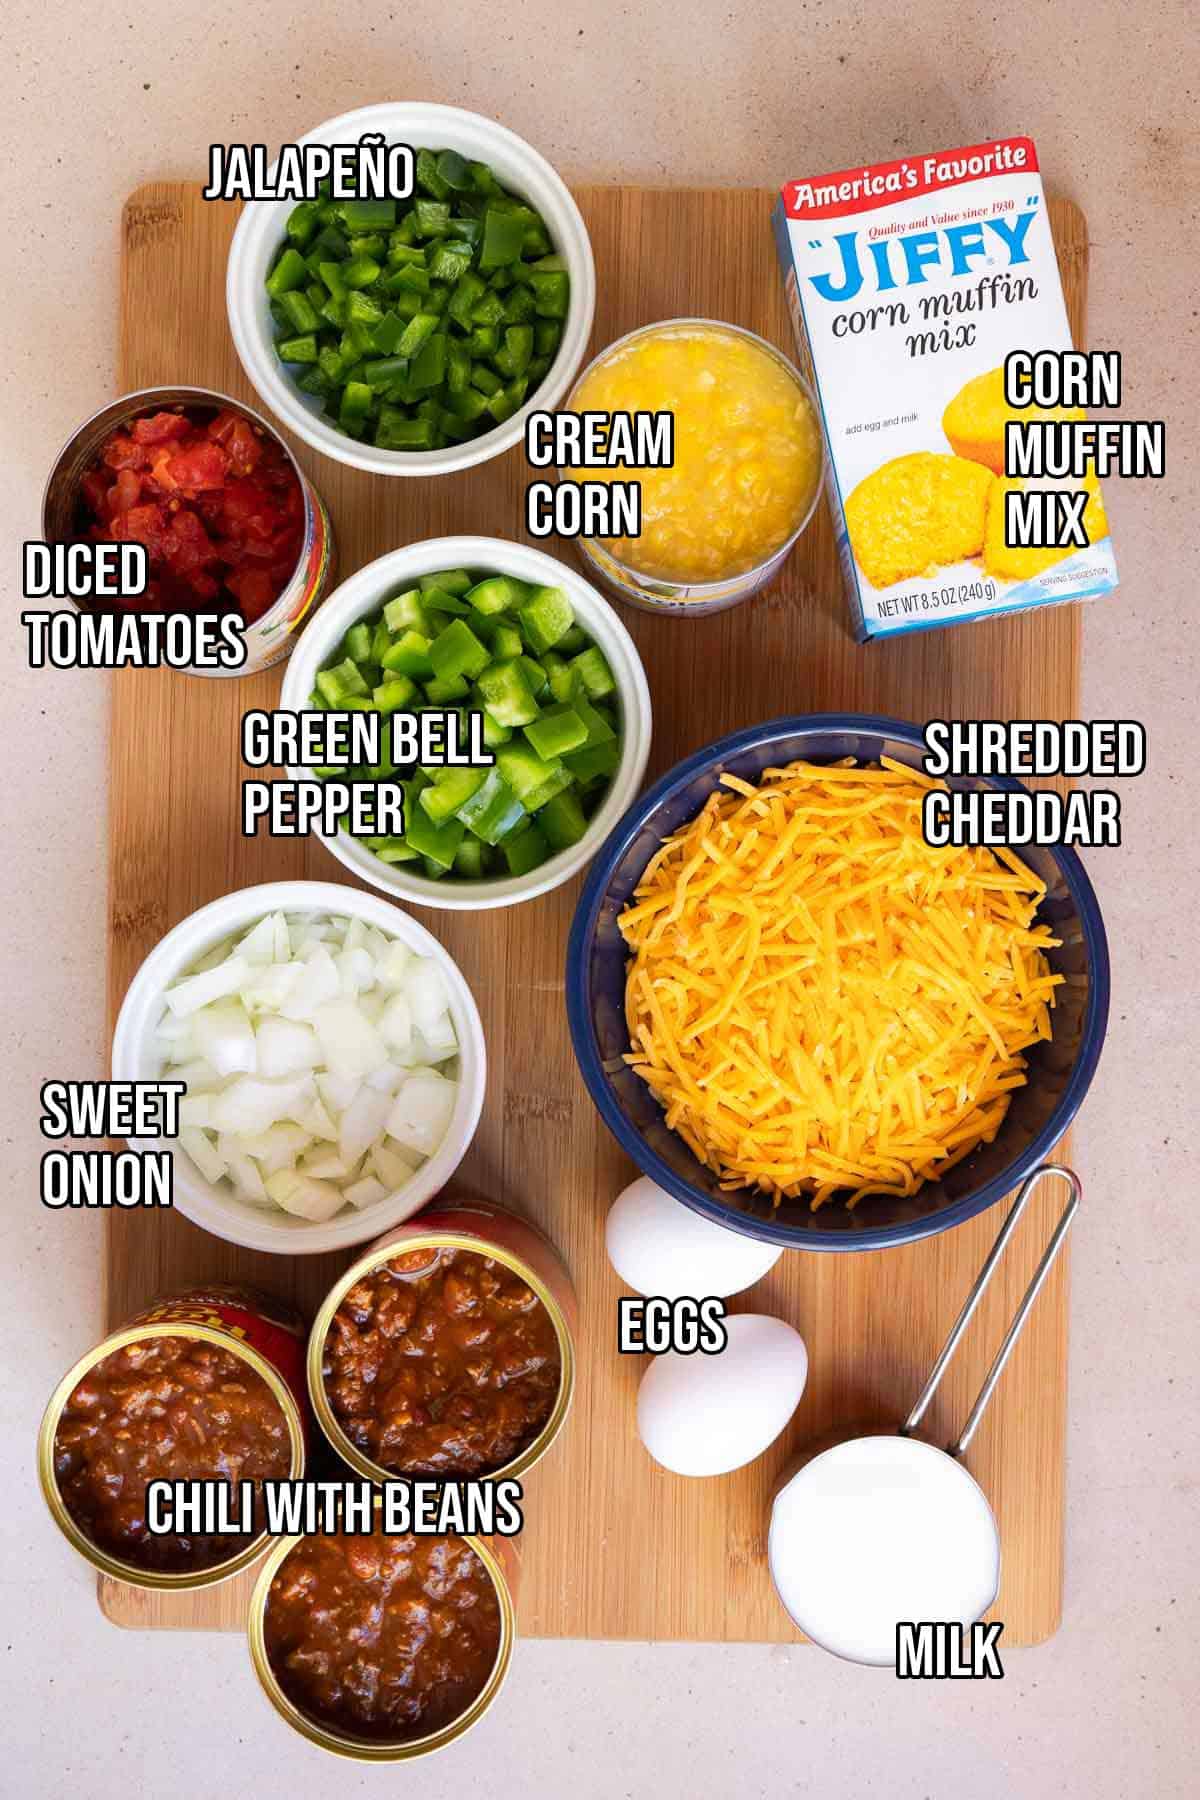 Chili cornbread casserole ingredients including canned chili with beans, fresh jalapeño, canned diced tomatoes, diced green bell pepper, diced sweet onion, shredded cheddar, a box of Jiffy corn muffin mix, canned cream style corn, eggs, and milk.